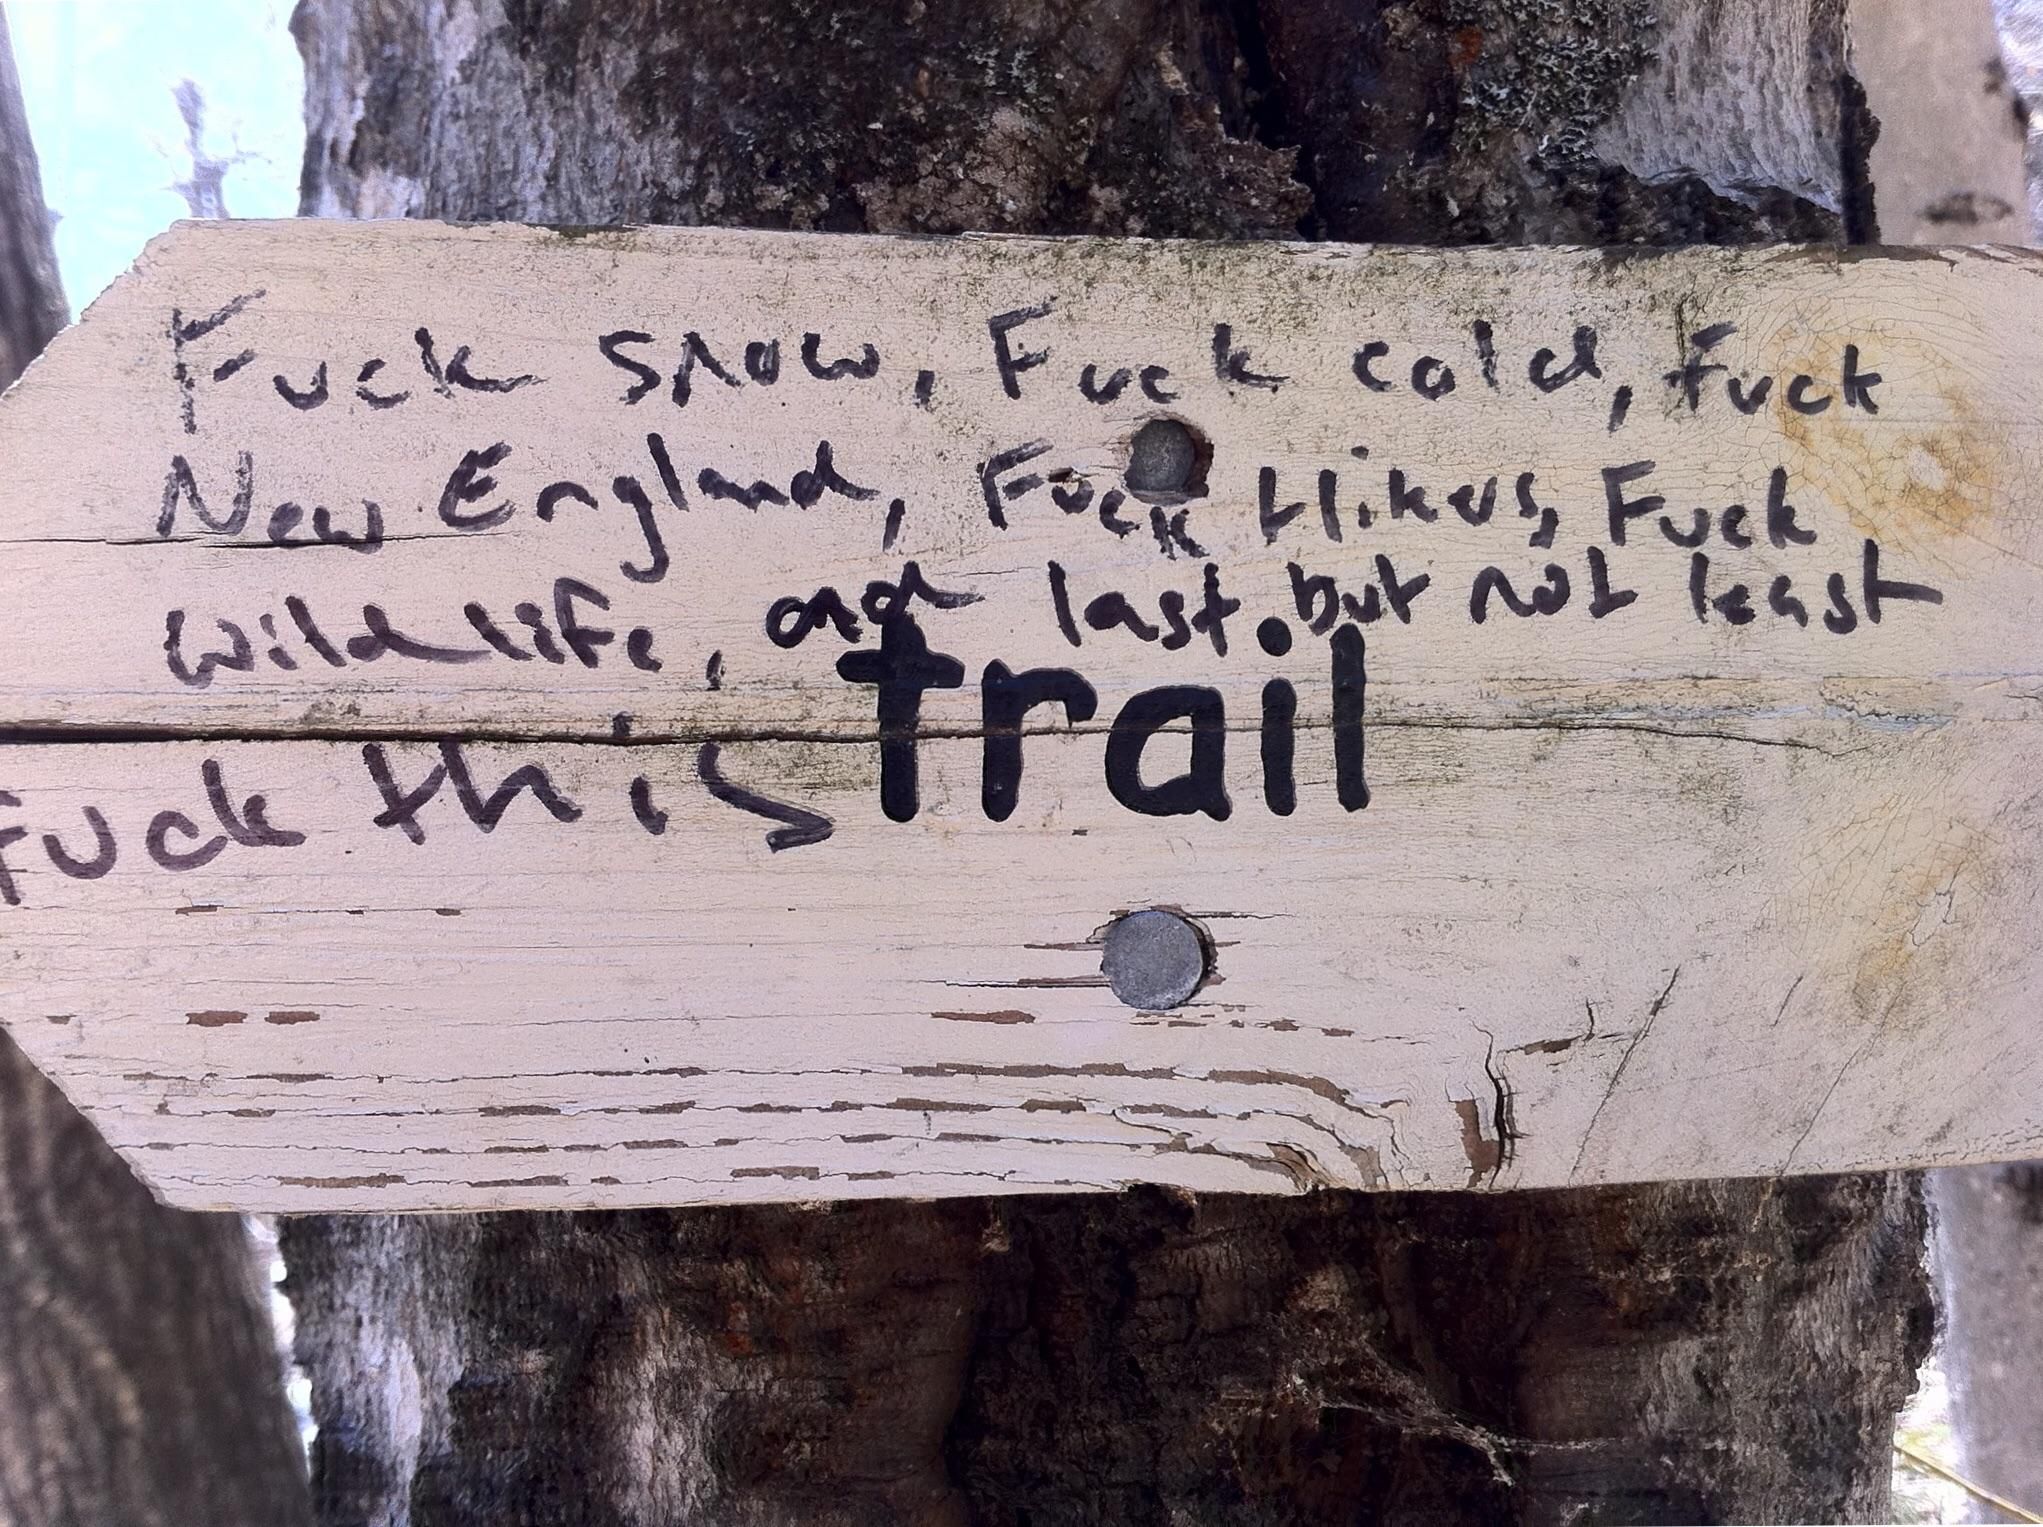 This person did not like the trail...